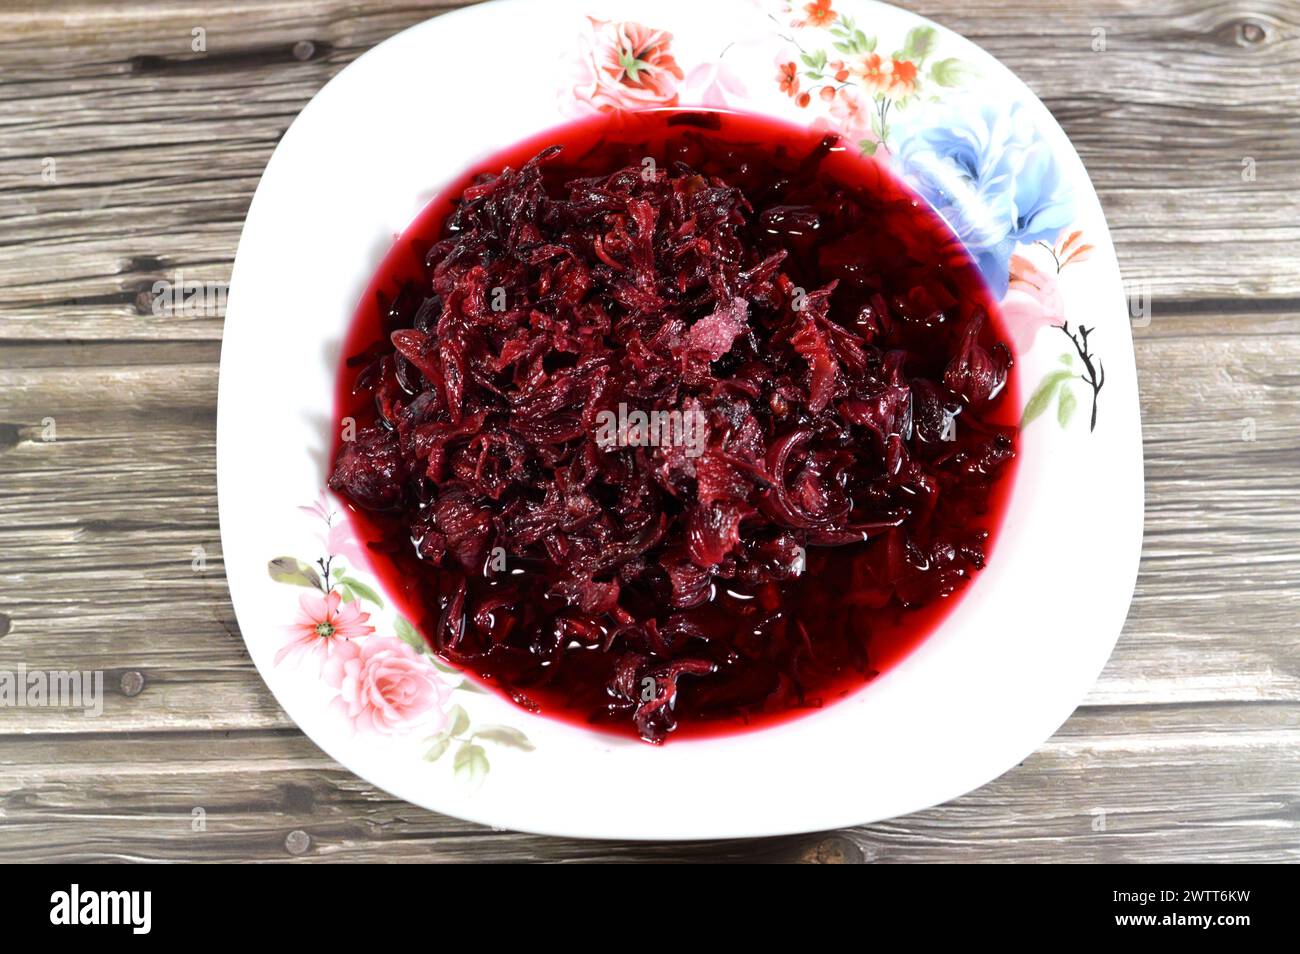 boiled roselle herbs in water, a dark red-purple colored bissap wonjo natural herbs, flowers of the Roselle plant Hibiscus used to prepare Roselle Jui Stock Photo